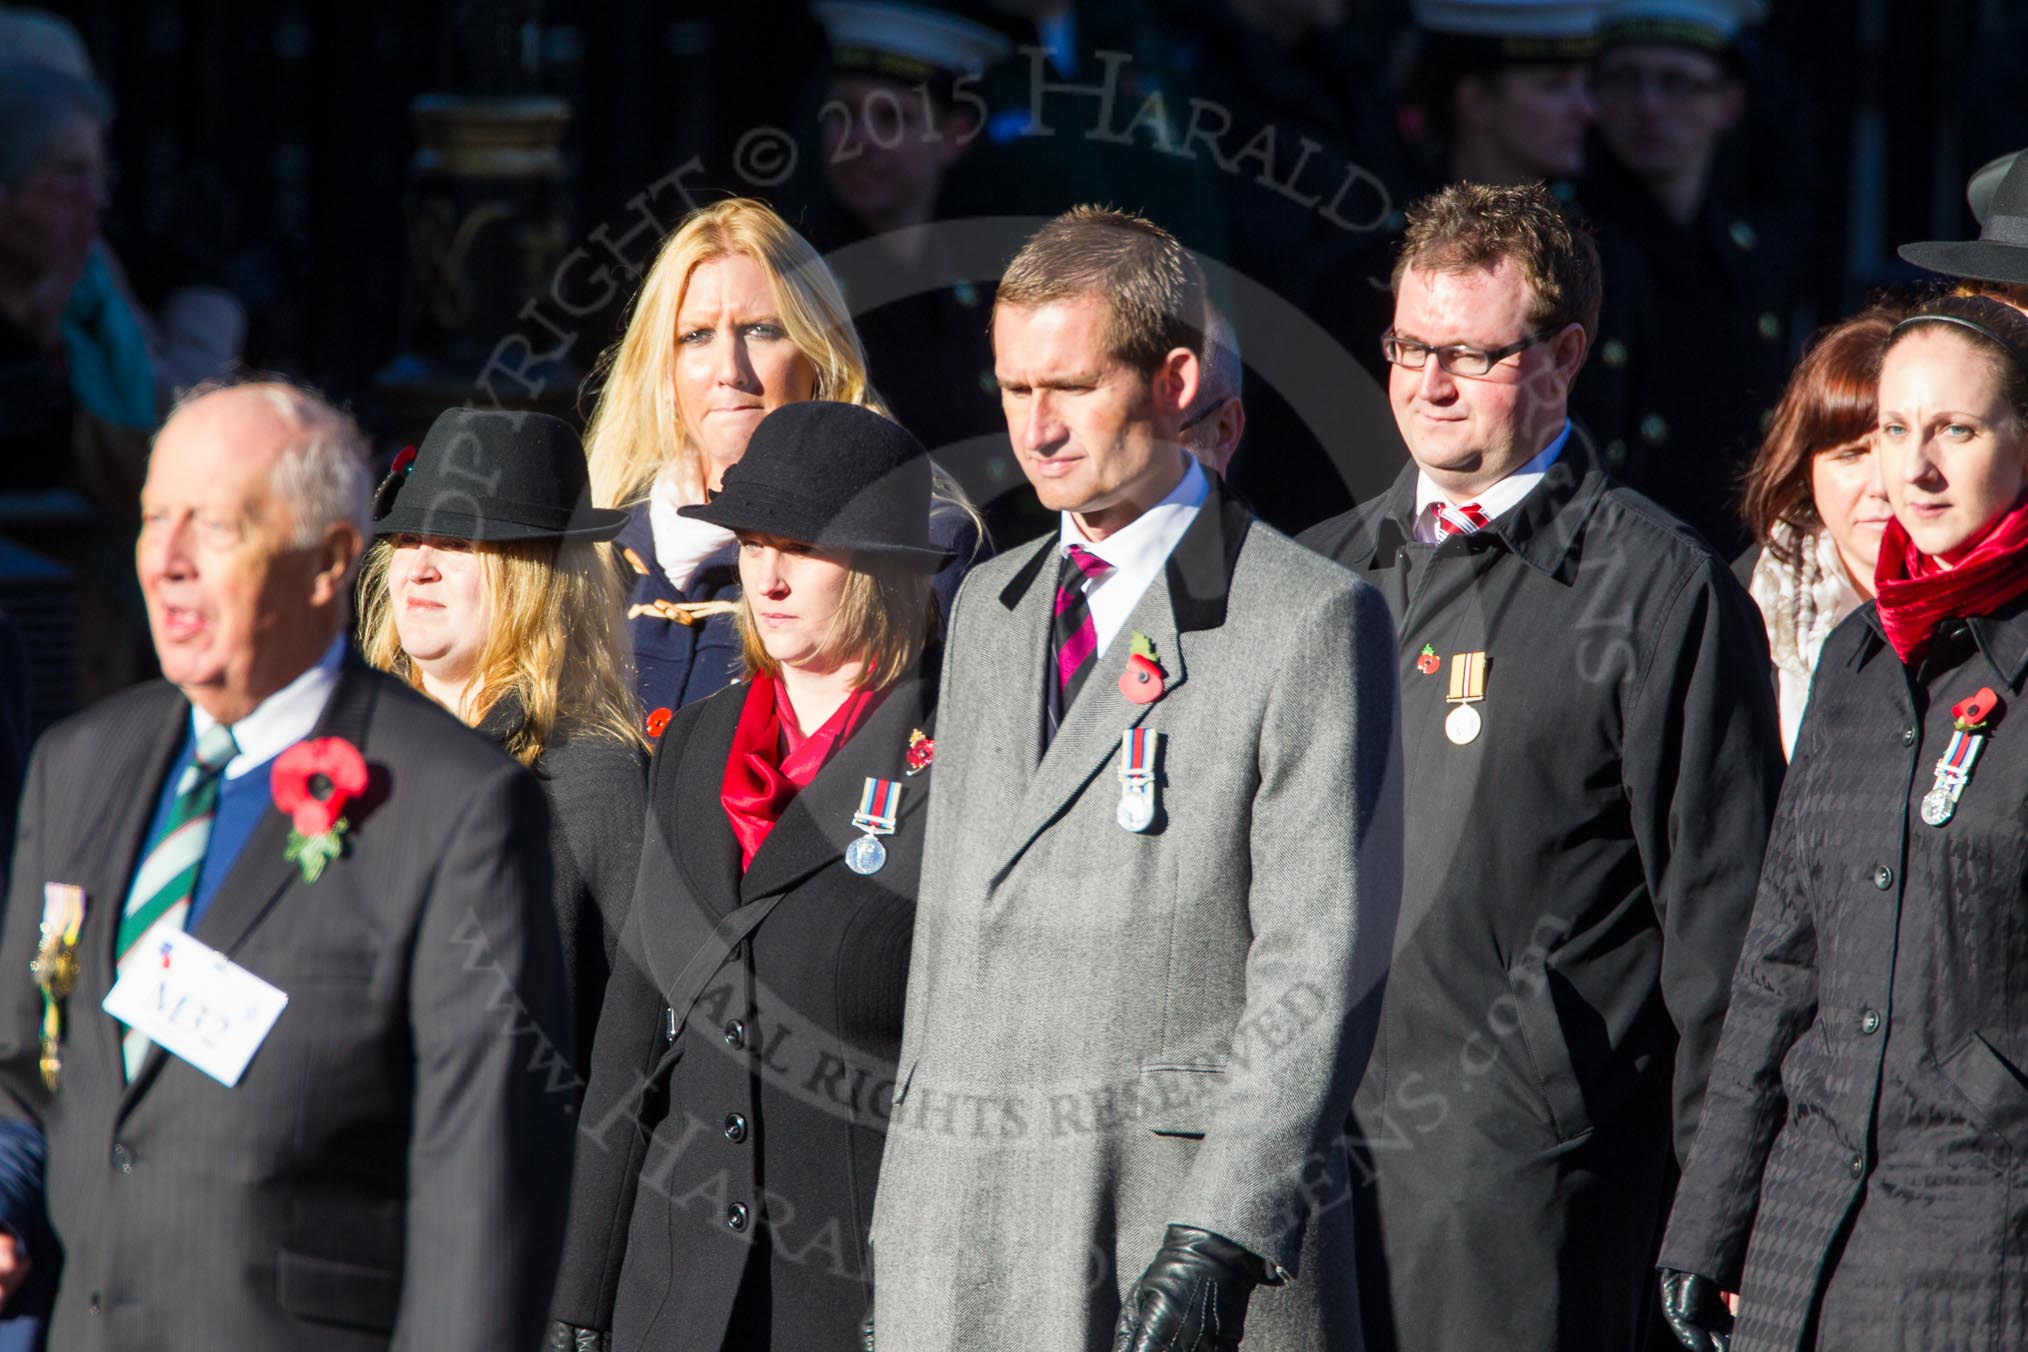 Remembrance Sunday Cenotaph March Past 2013: M32 - Gallipoli Association..
Press stand opposite the Foreign Office building, Whitehall, London SW1,
London,
Greater London,
United Kingdom,
on 10 November 2013 at 12:12, image #2120